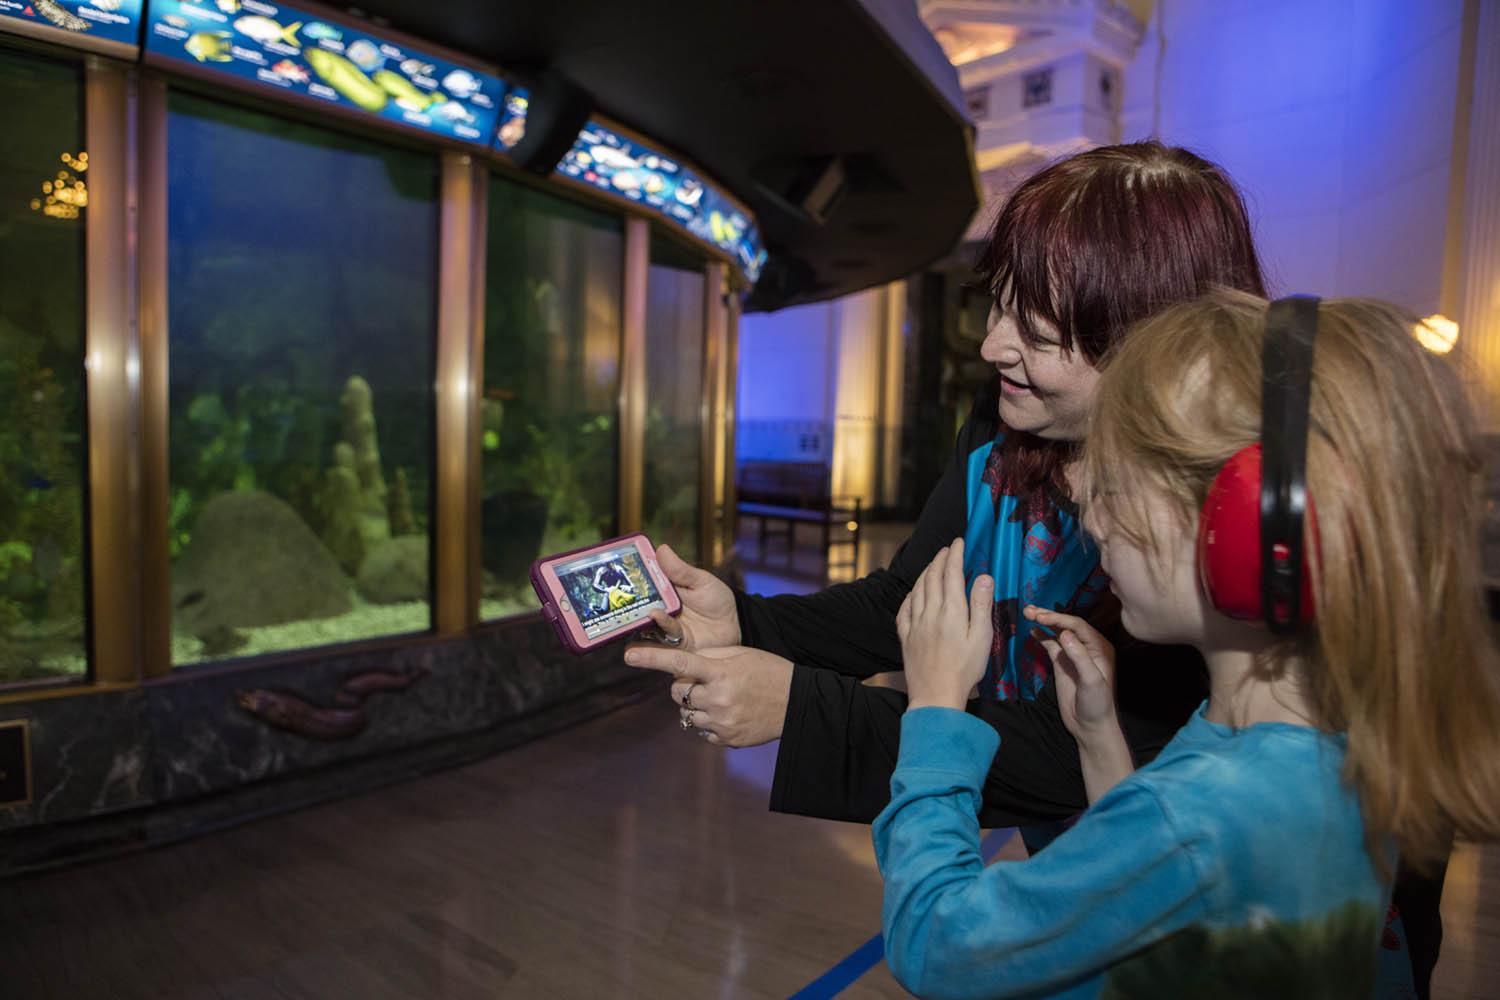 A mother and daughter explore Shedd’s Sensory-Friendly App, designed for guests with autism or a sensory processing disorder, in front of the aquarium’s Caribbean Reef exhibit. (Brenna Hernandez / Shedd Aquarium)